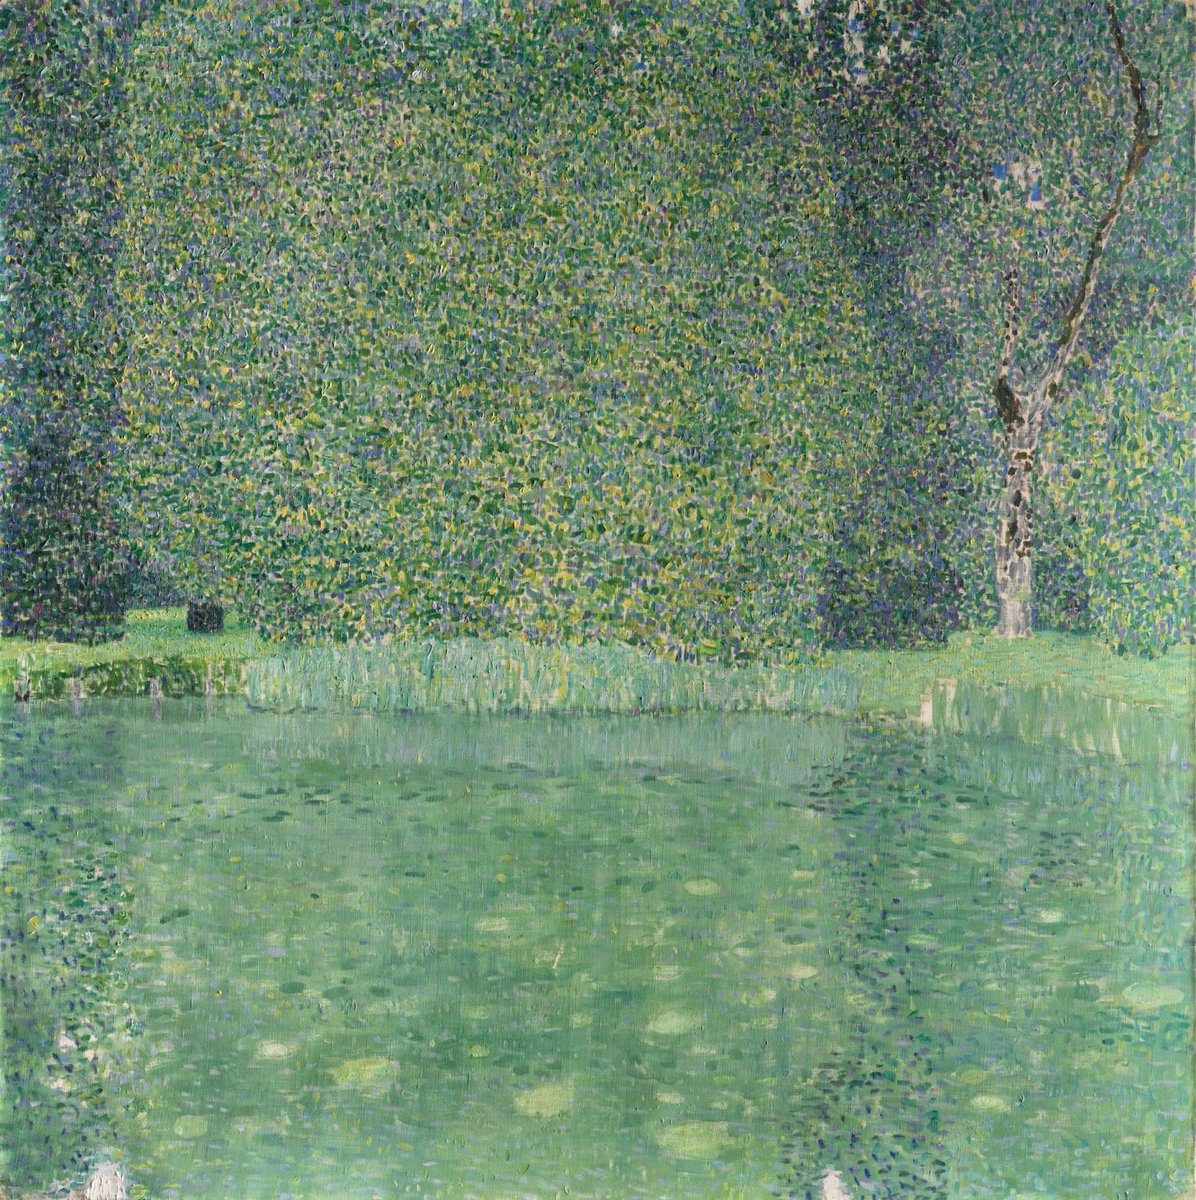 PAINTINGS OF THE DAY: #landscapes by #AustrianArtist #GustavKlimt circa #1900s #1910s #paintings #greatartist